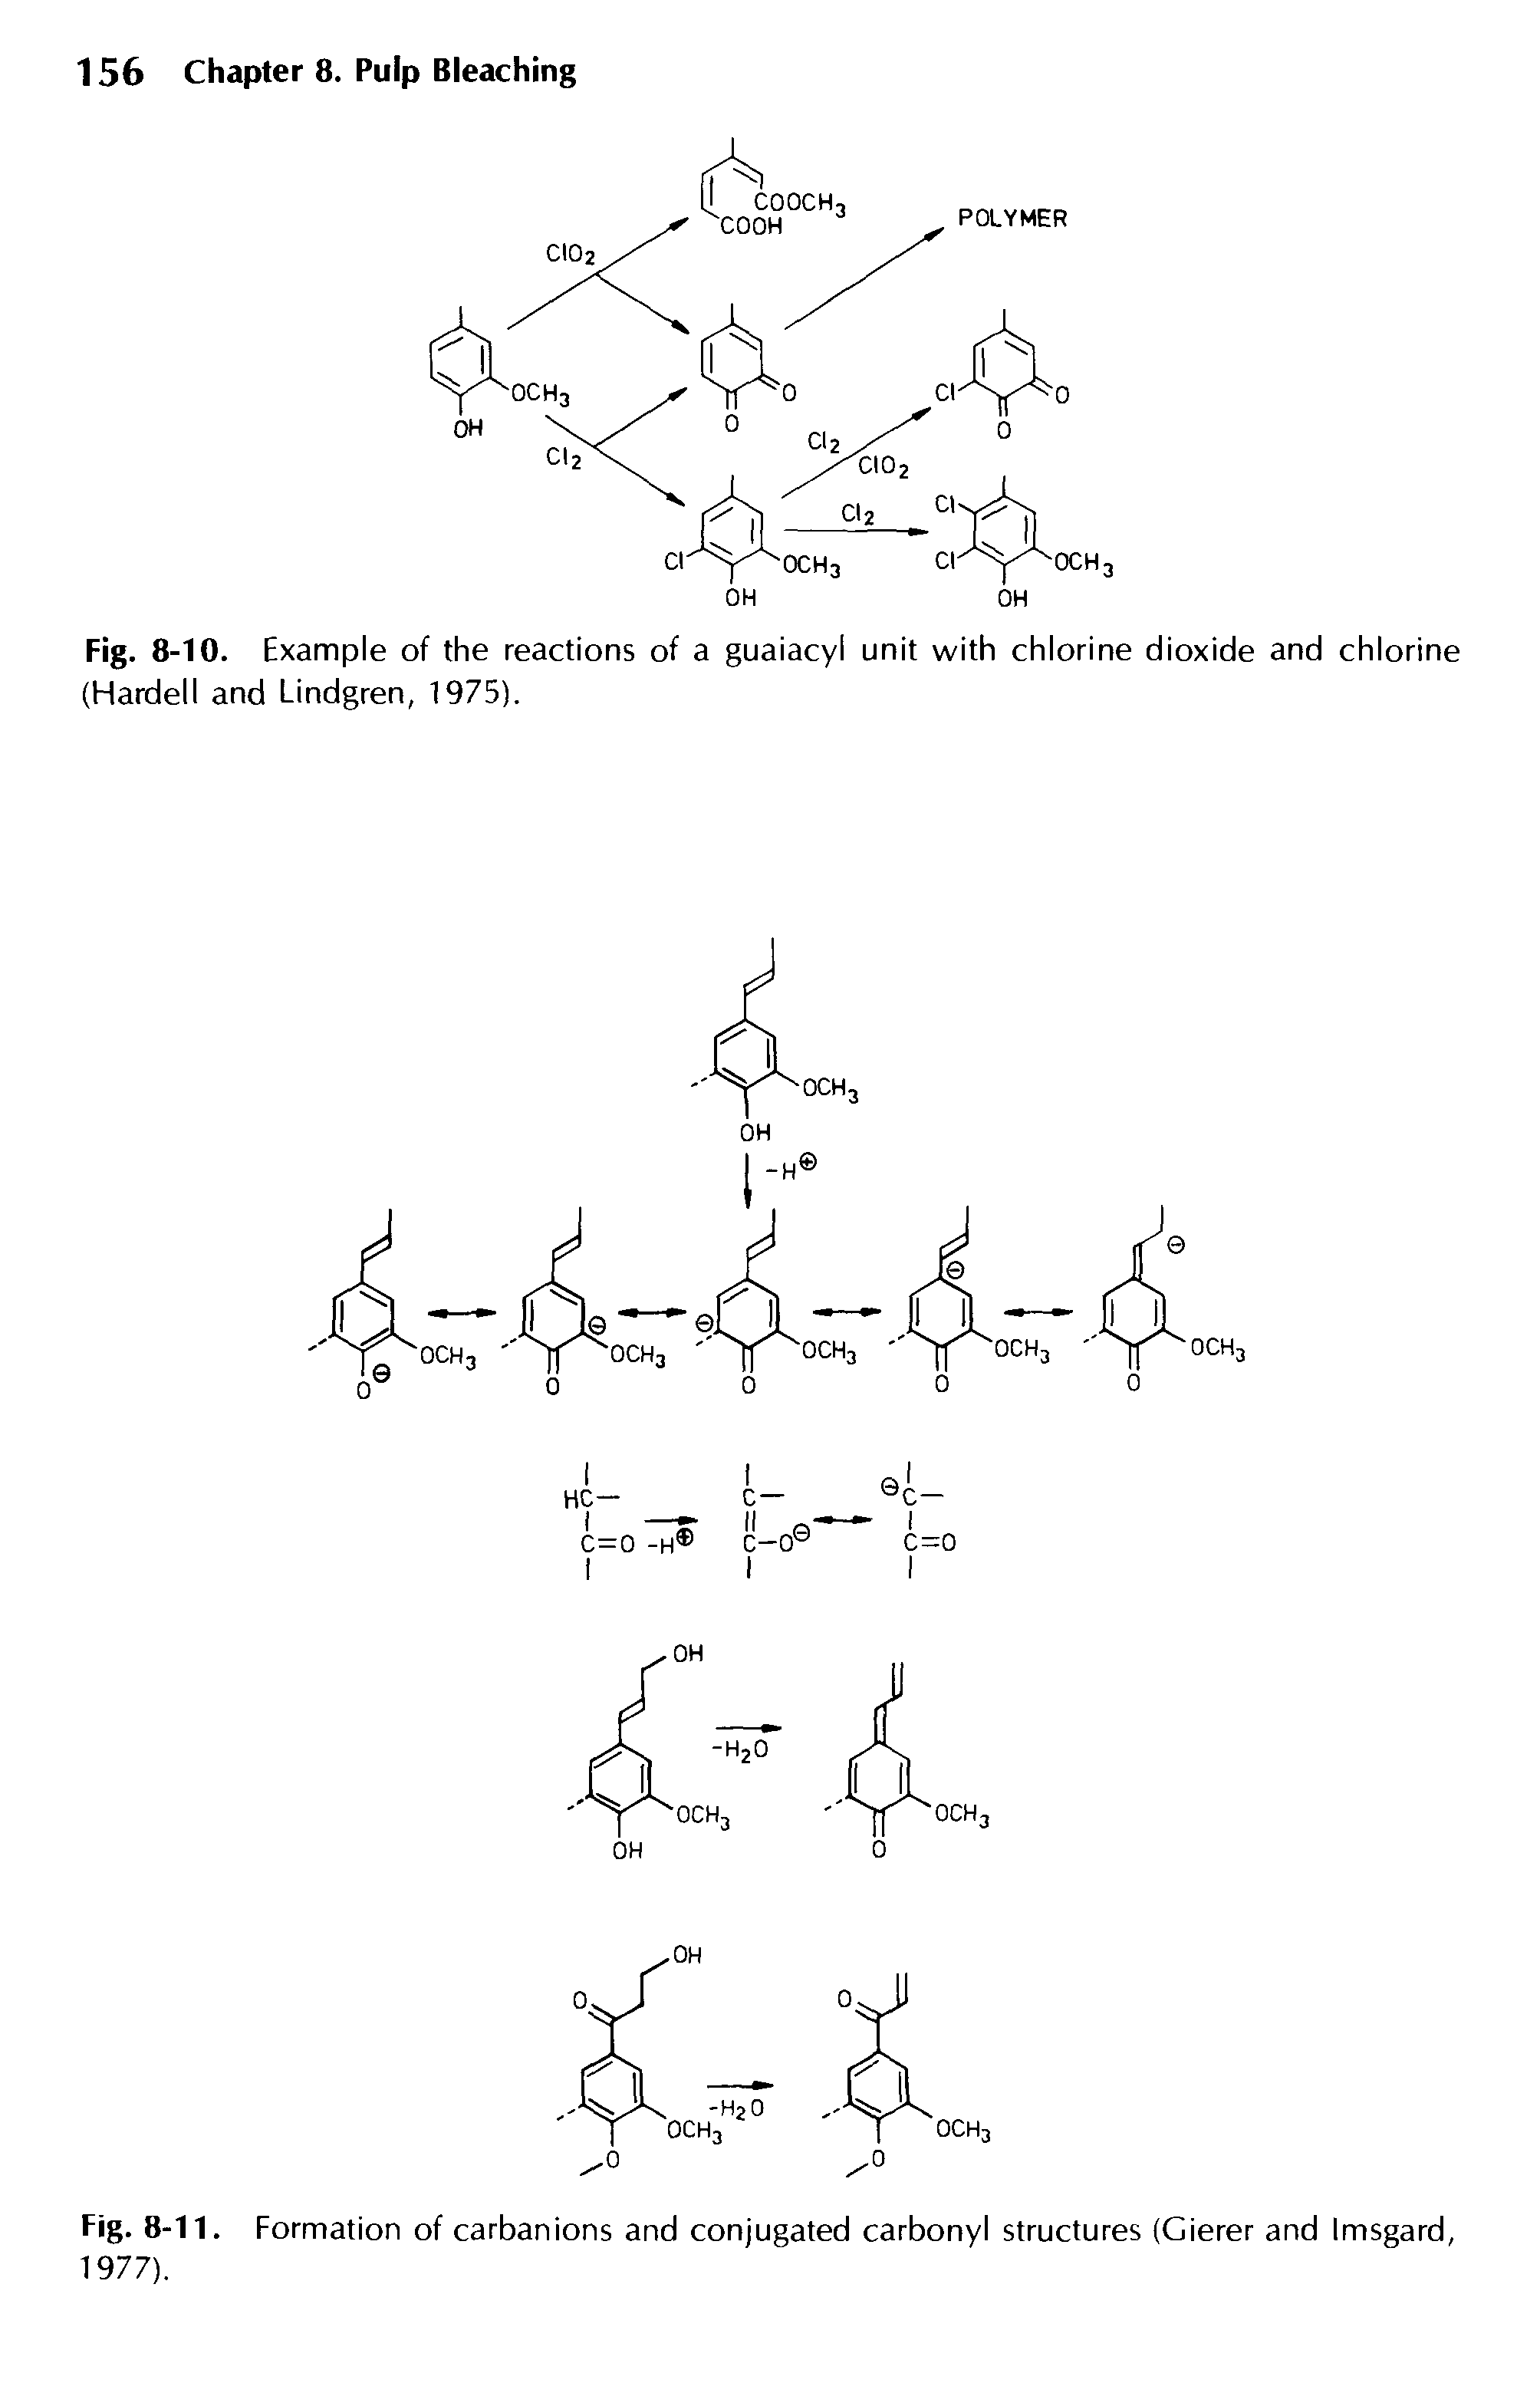 Fig. 8-10. Example of the reactions of a guaiacyl unit with chlorine dioxide and chlorine (Hardell and Lindgren, 1975).